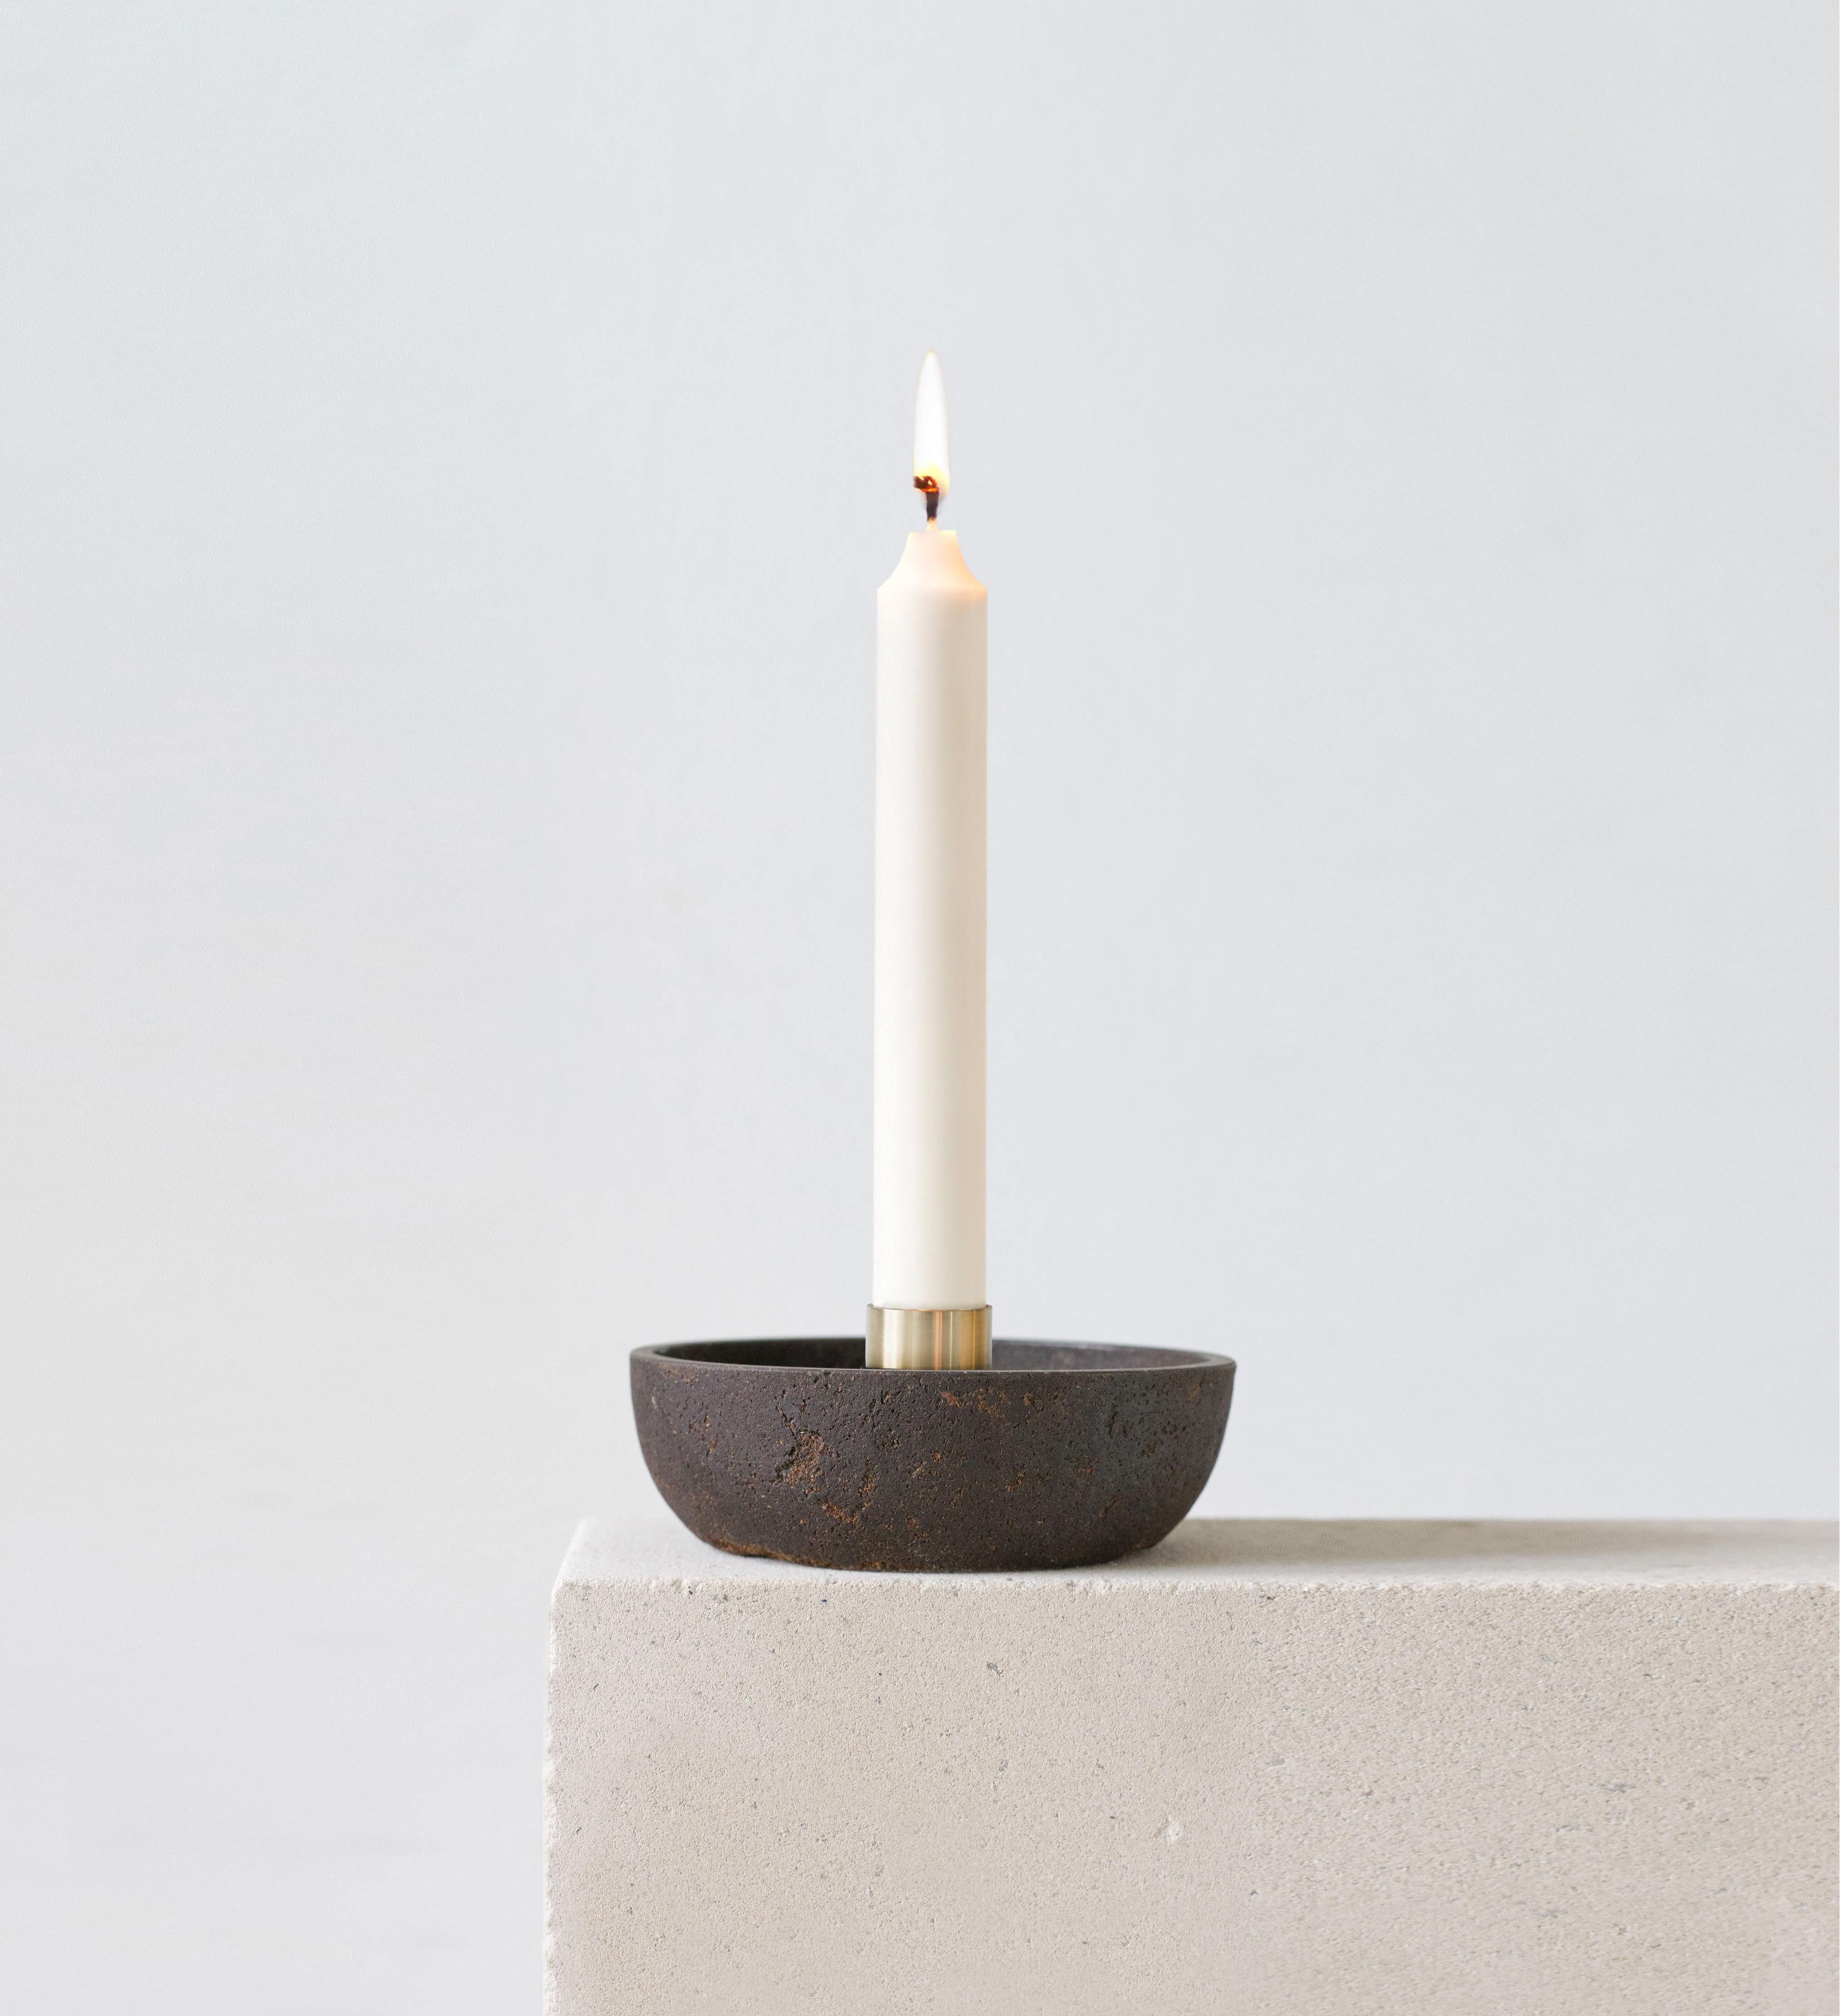 Oak candlestick holder by Evelina Kudabaite Studio
Handmade
Materials: oak, brass
Dimensions: H 45 mm x D 105 mm
Colour: dark brown
Notes: for dry use

Since 2015, product designer Evelina Kudabaite keeps on developing and making GIRIA